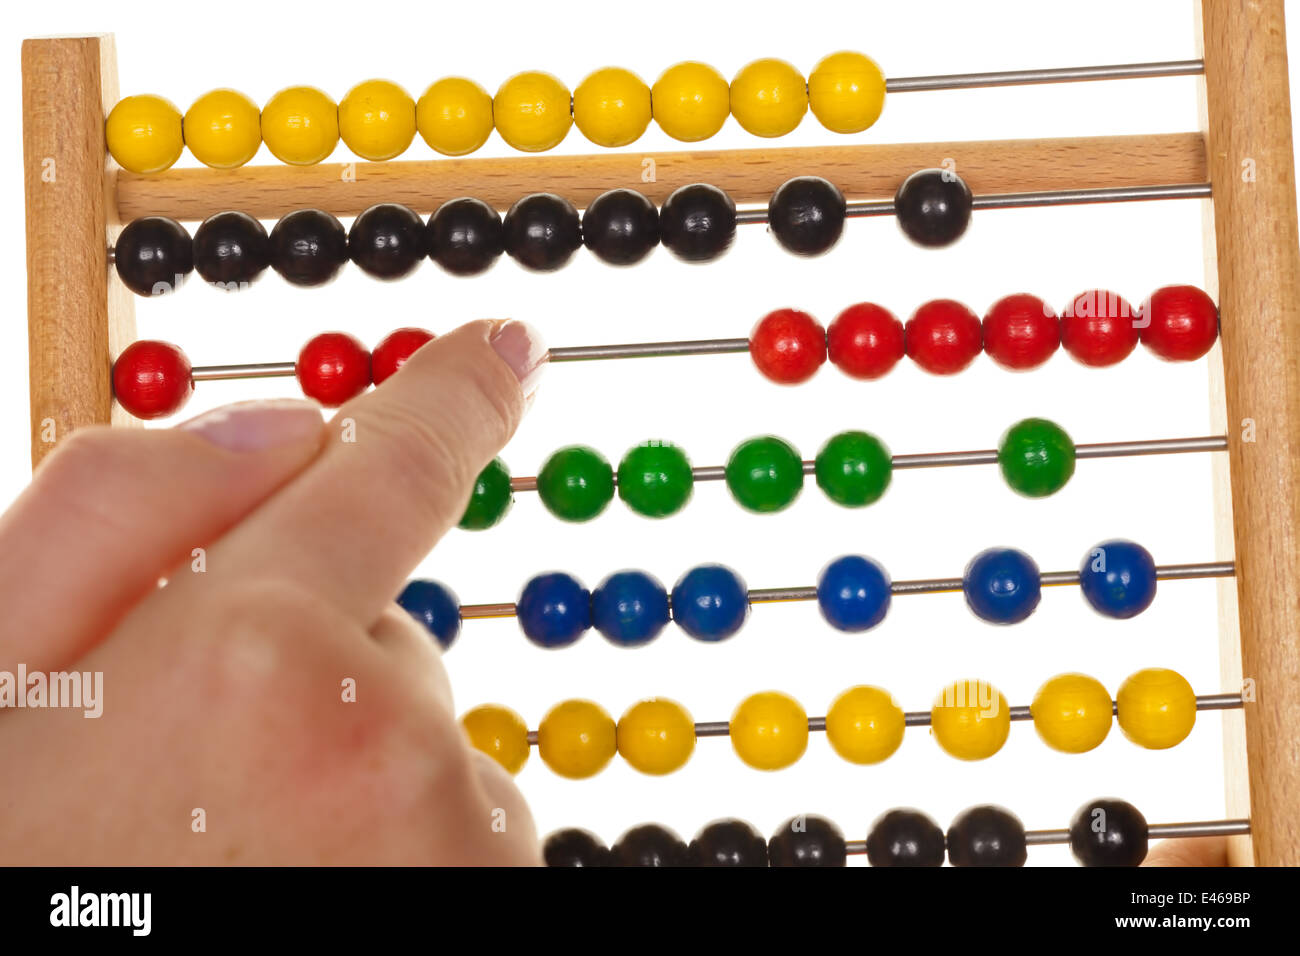 An abacus for learning mathematics. against a white background Stock Photo